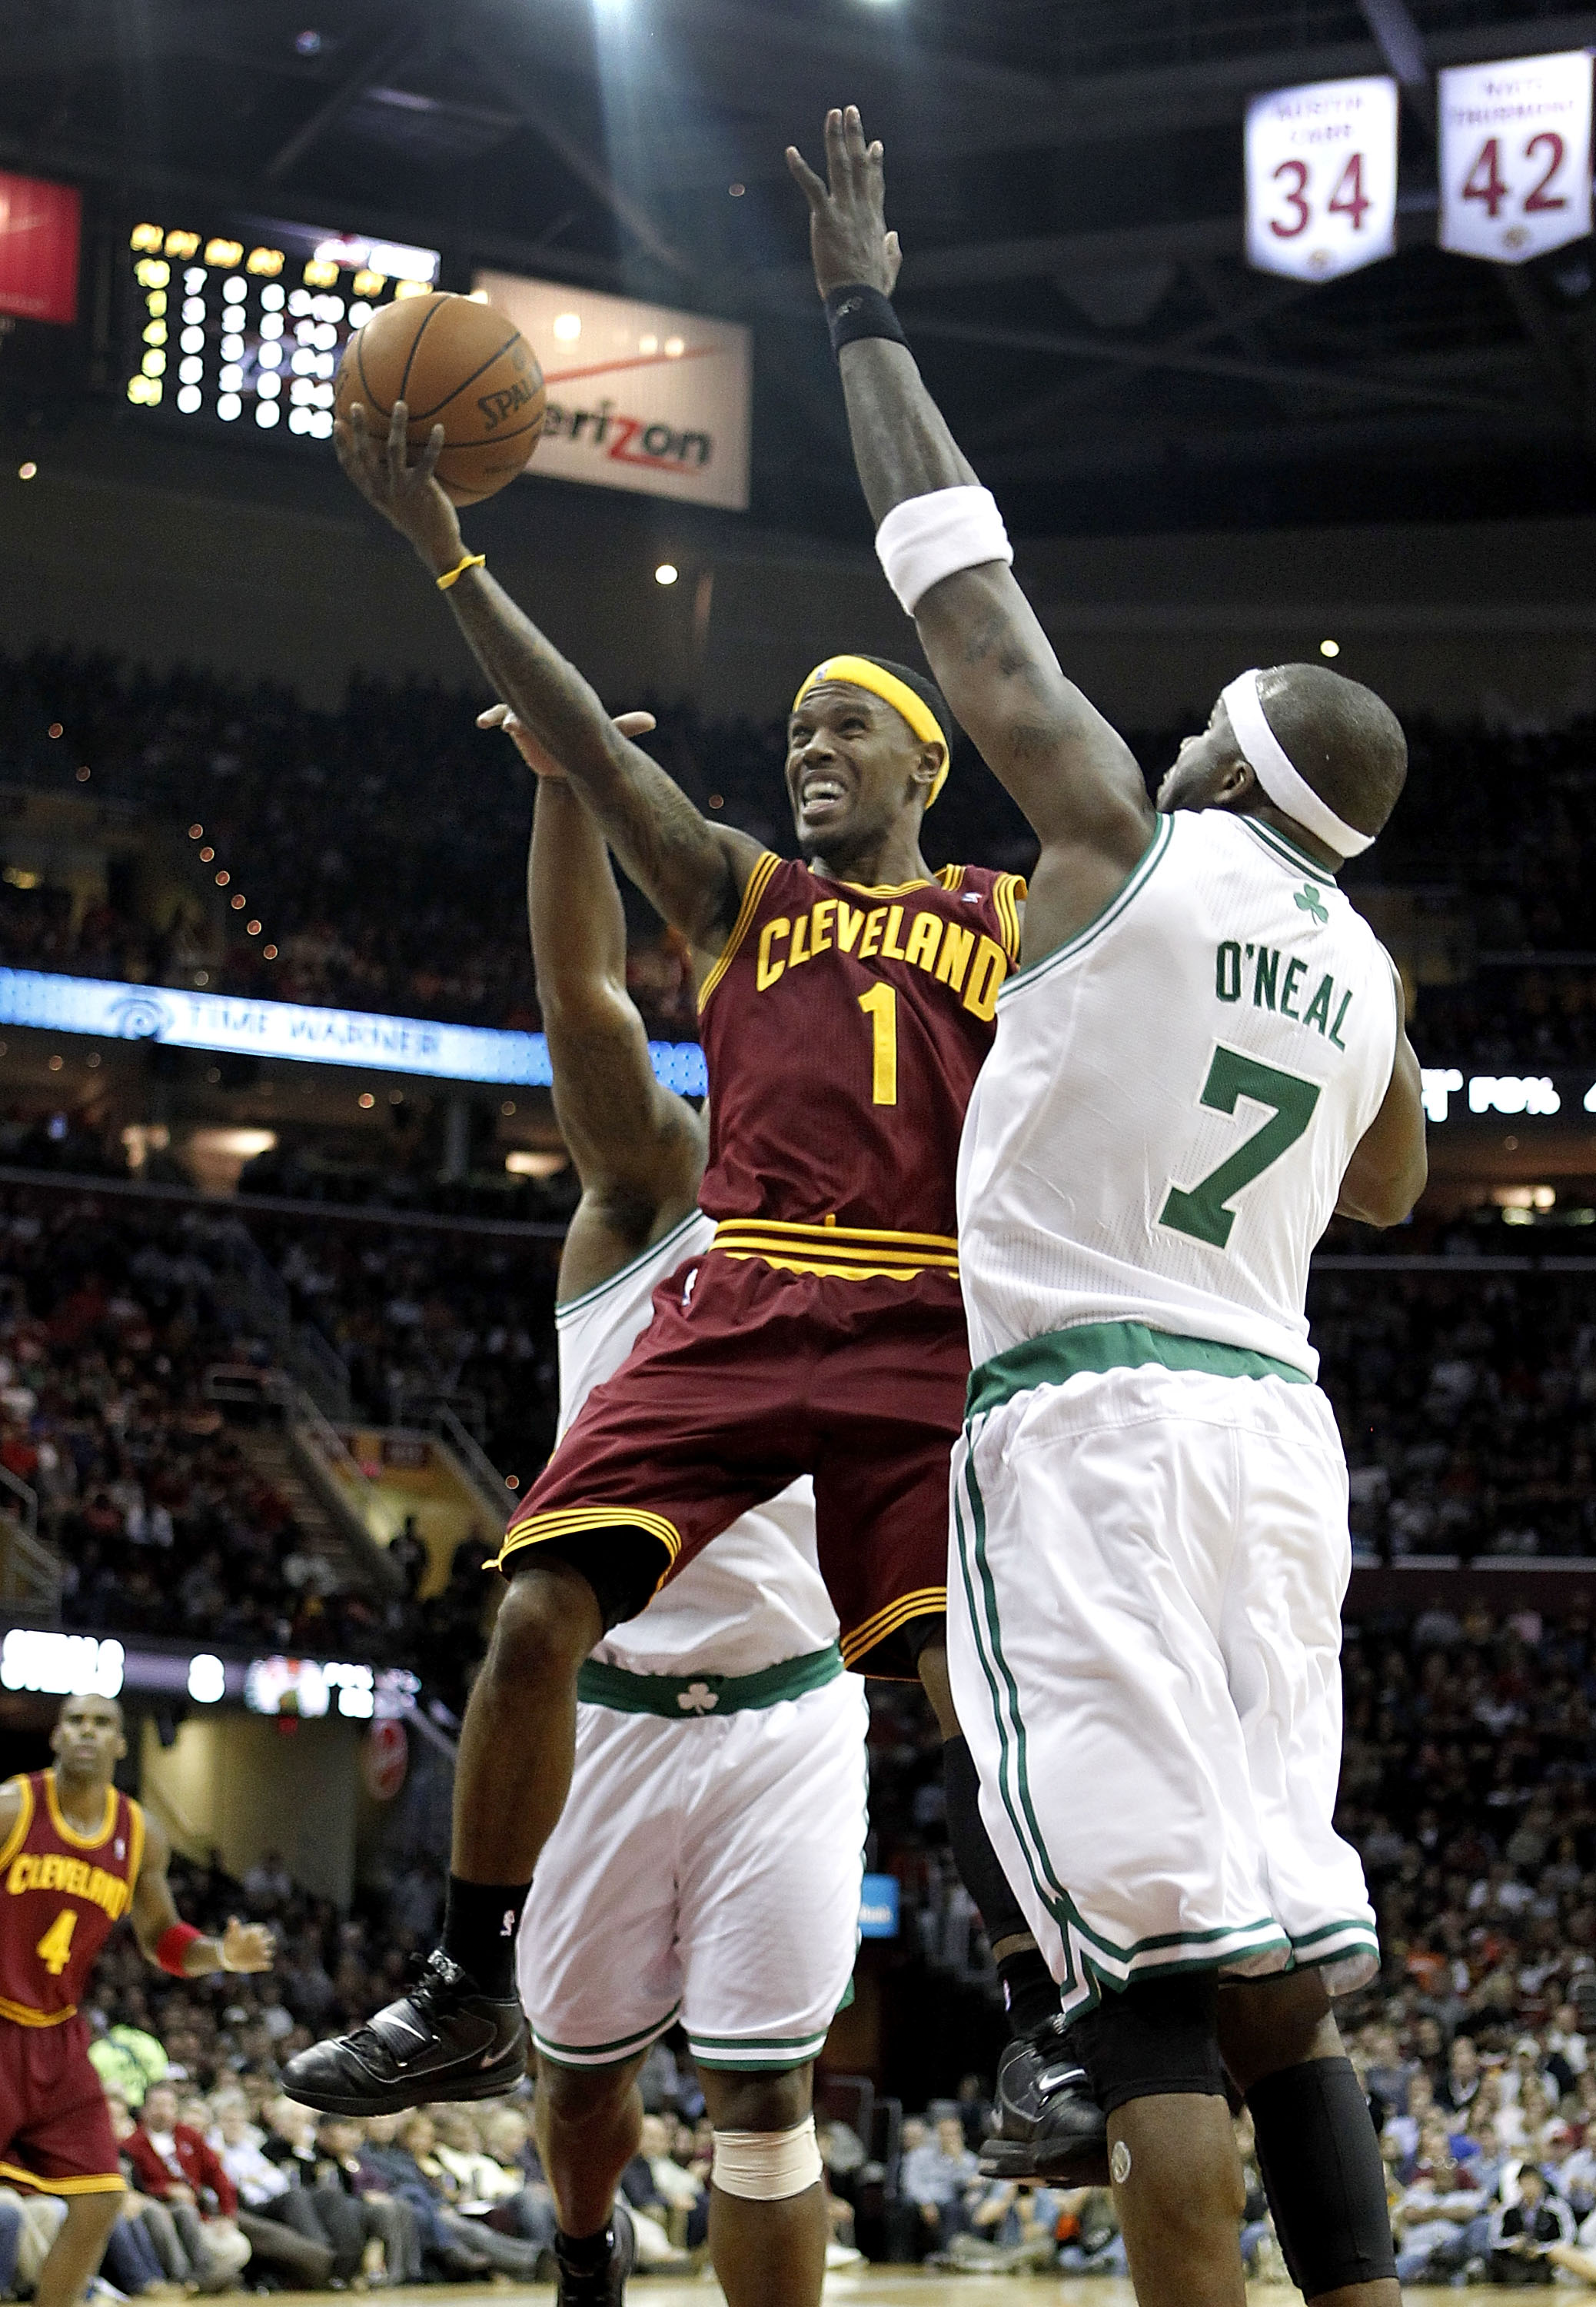 CLEVELAND - OCTOBER 27: Daniel Gibson #1 of the Cleveland Cavaliers tries to get a shot off around Jermaine O'Neal #7 of the Boston Celtics at Quicken Loans Arena on October 27, 2010 in Cleveland, Ohio. Cleveland won the game 95-87.  (Photo by Gregory Sha